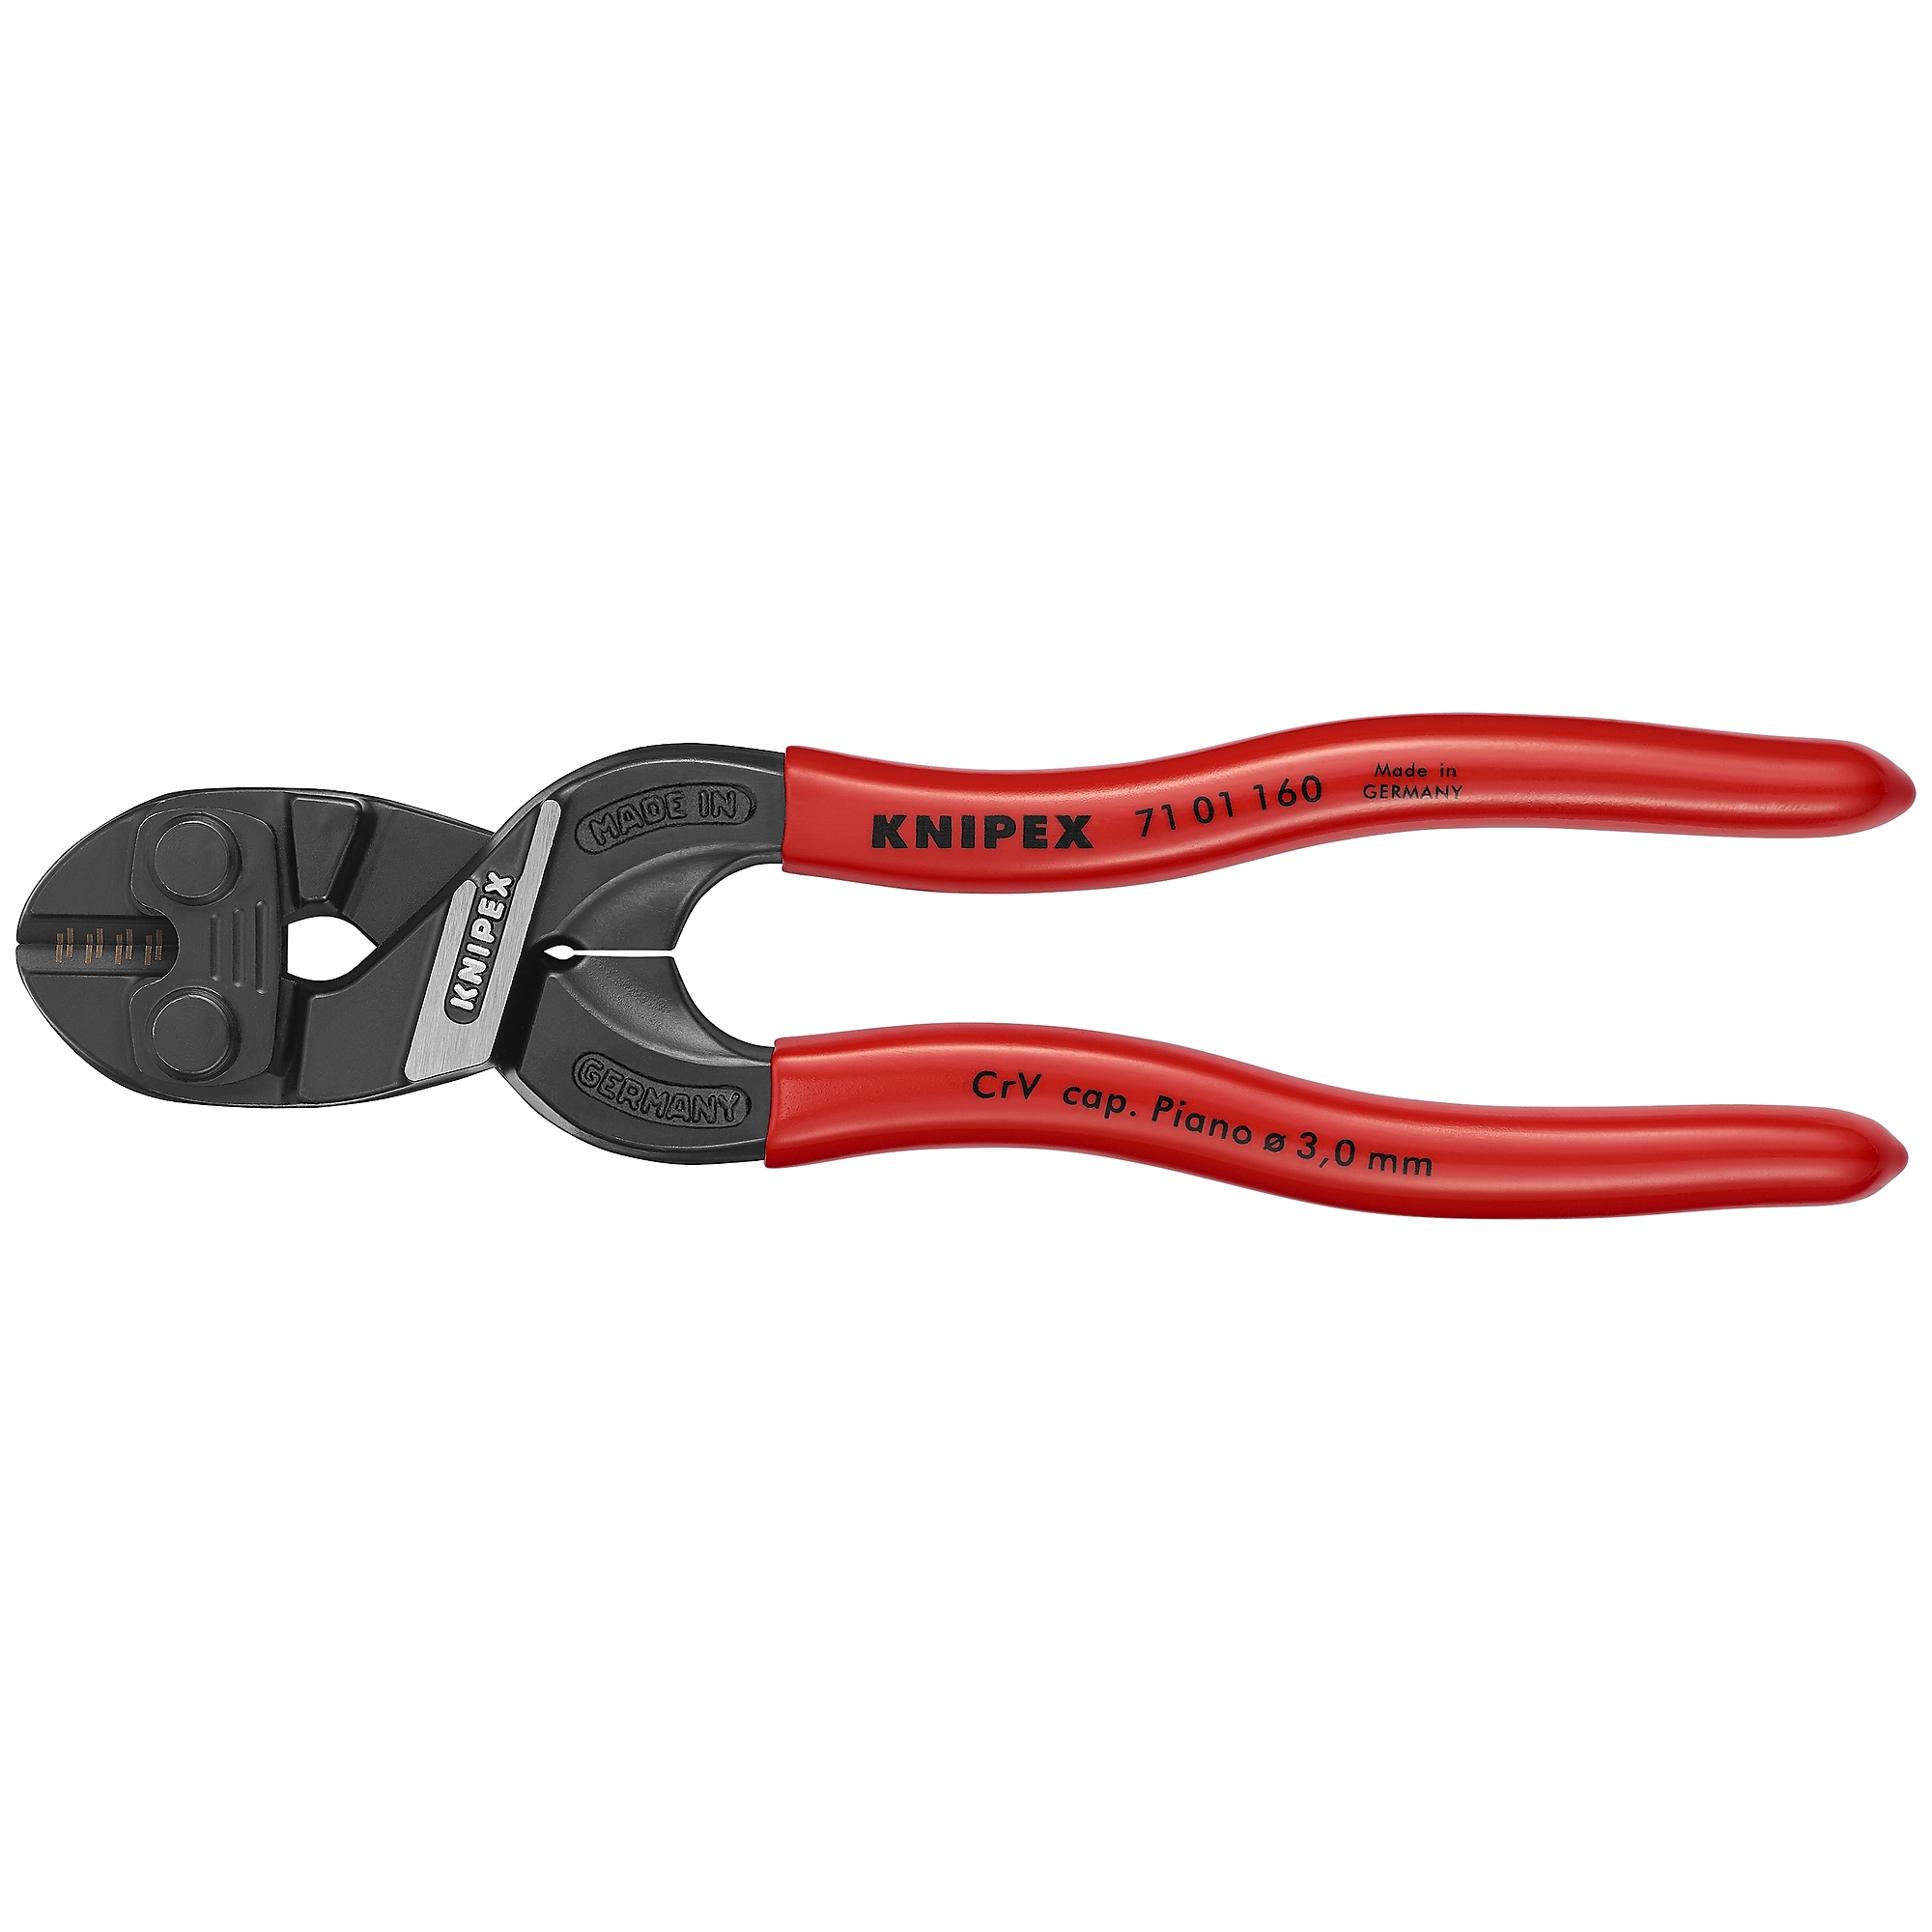 KNIPEX, CoBolt Bolt Cutters, 6.25Inch, Plastic coating, Tool Length 6.5 in, Jaw Opening 0.3 in, Cutting Capacity 0.13 in, Model 71 01 160 SBA